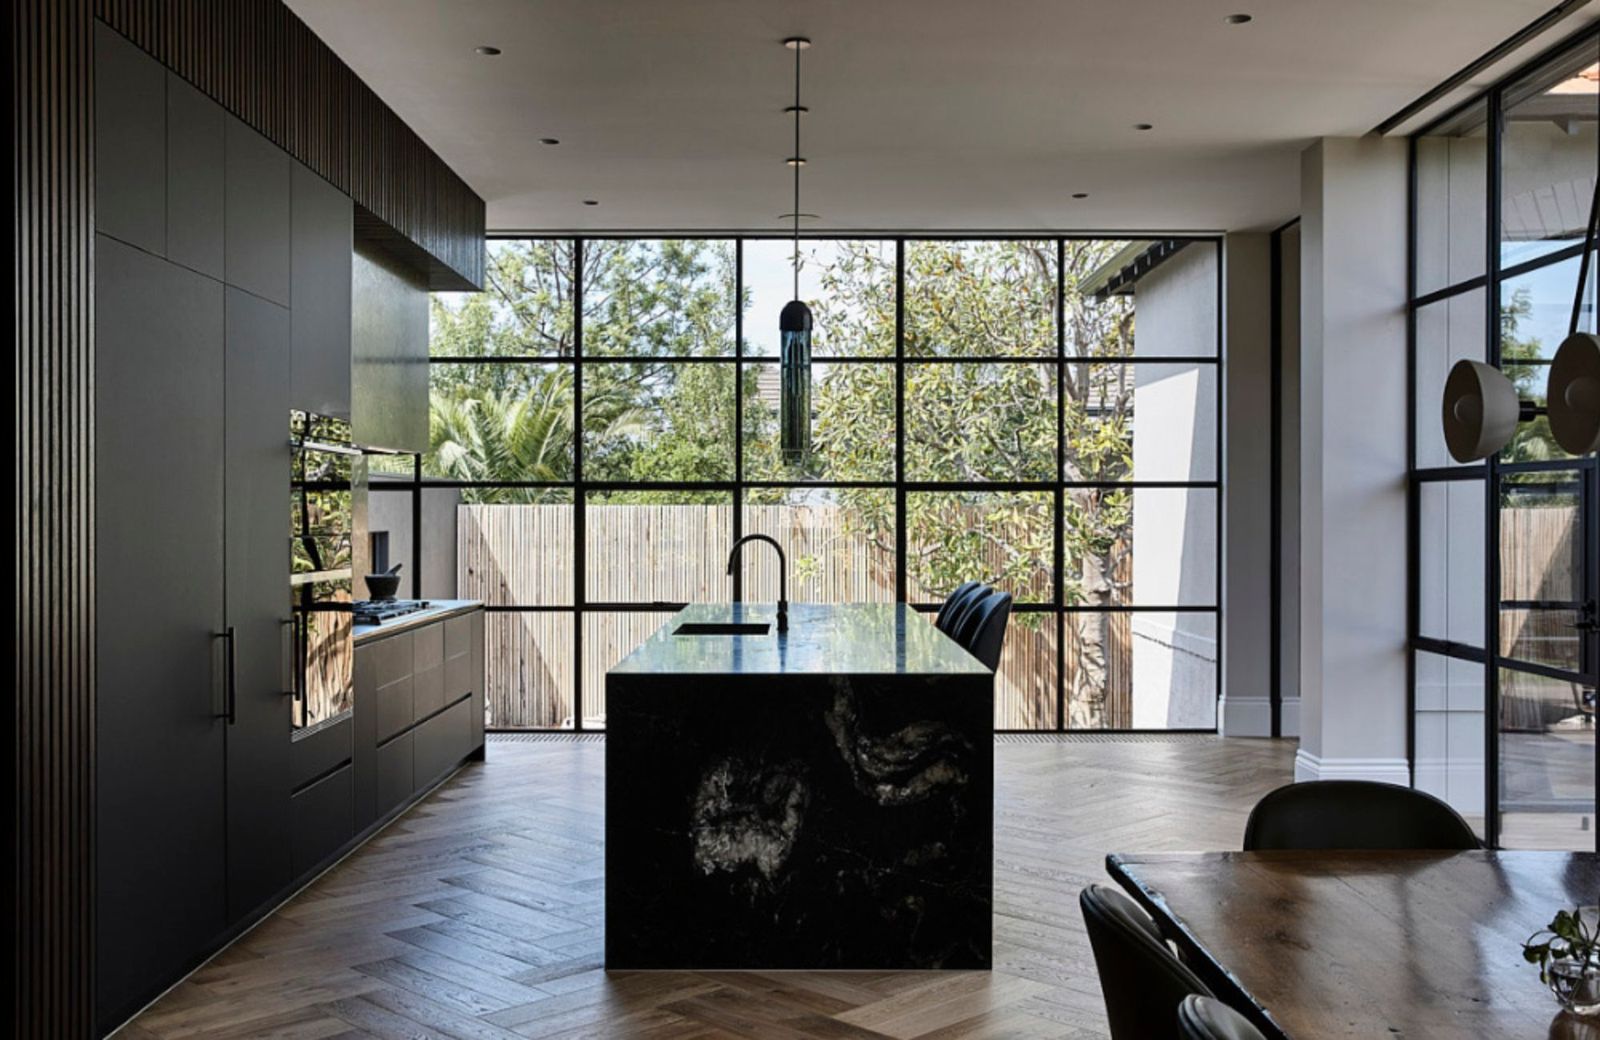 Dutch Gable House by Austin Design. Kitchen dining room, large windows upening up to garden